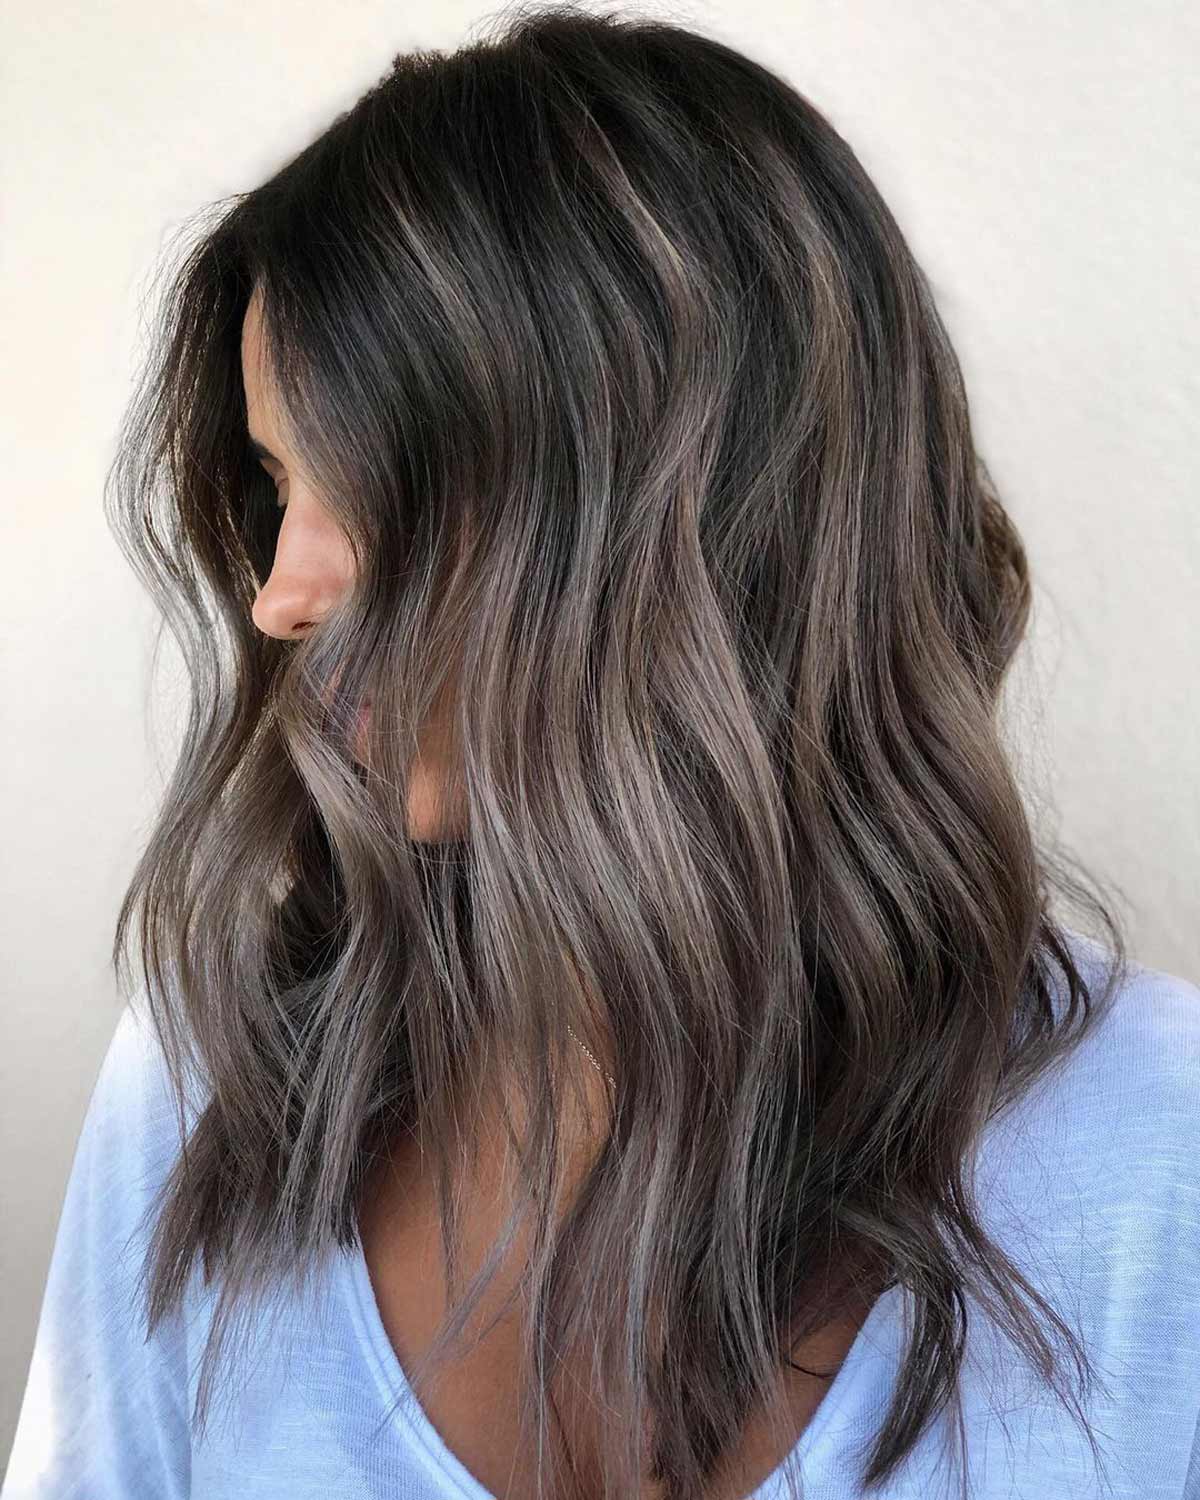 40 Latest Hottest Hair Colour Ideas for Women: Hair Color Trends 2023 -  Hairstyles Weekly | Colored hair tips, Hair styles, Cool hair color